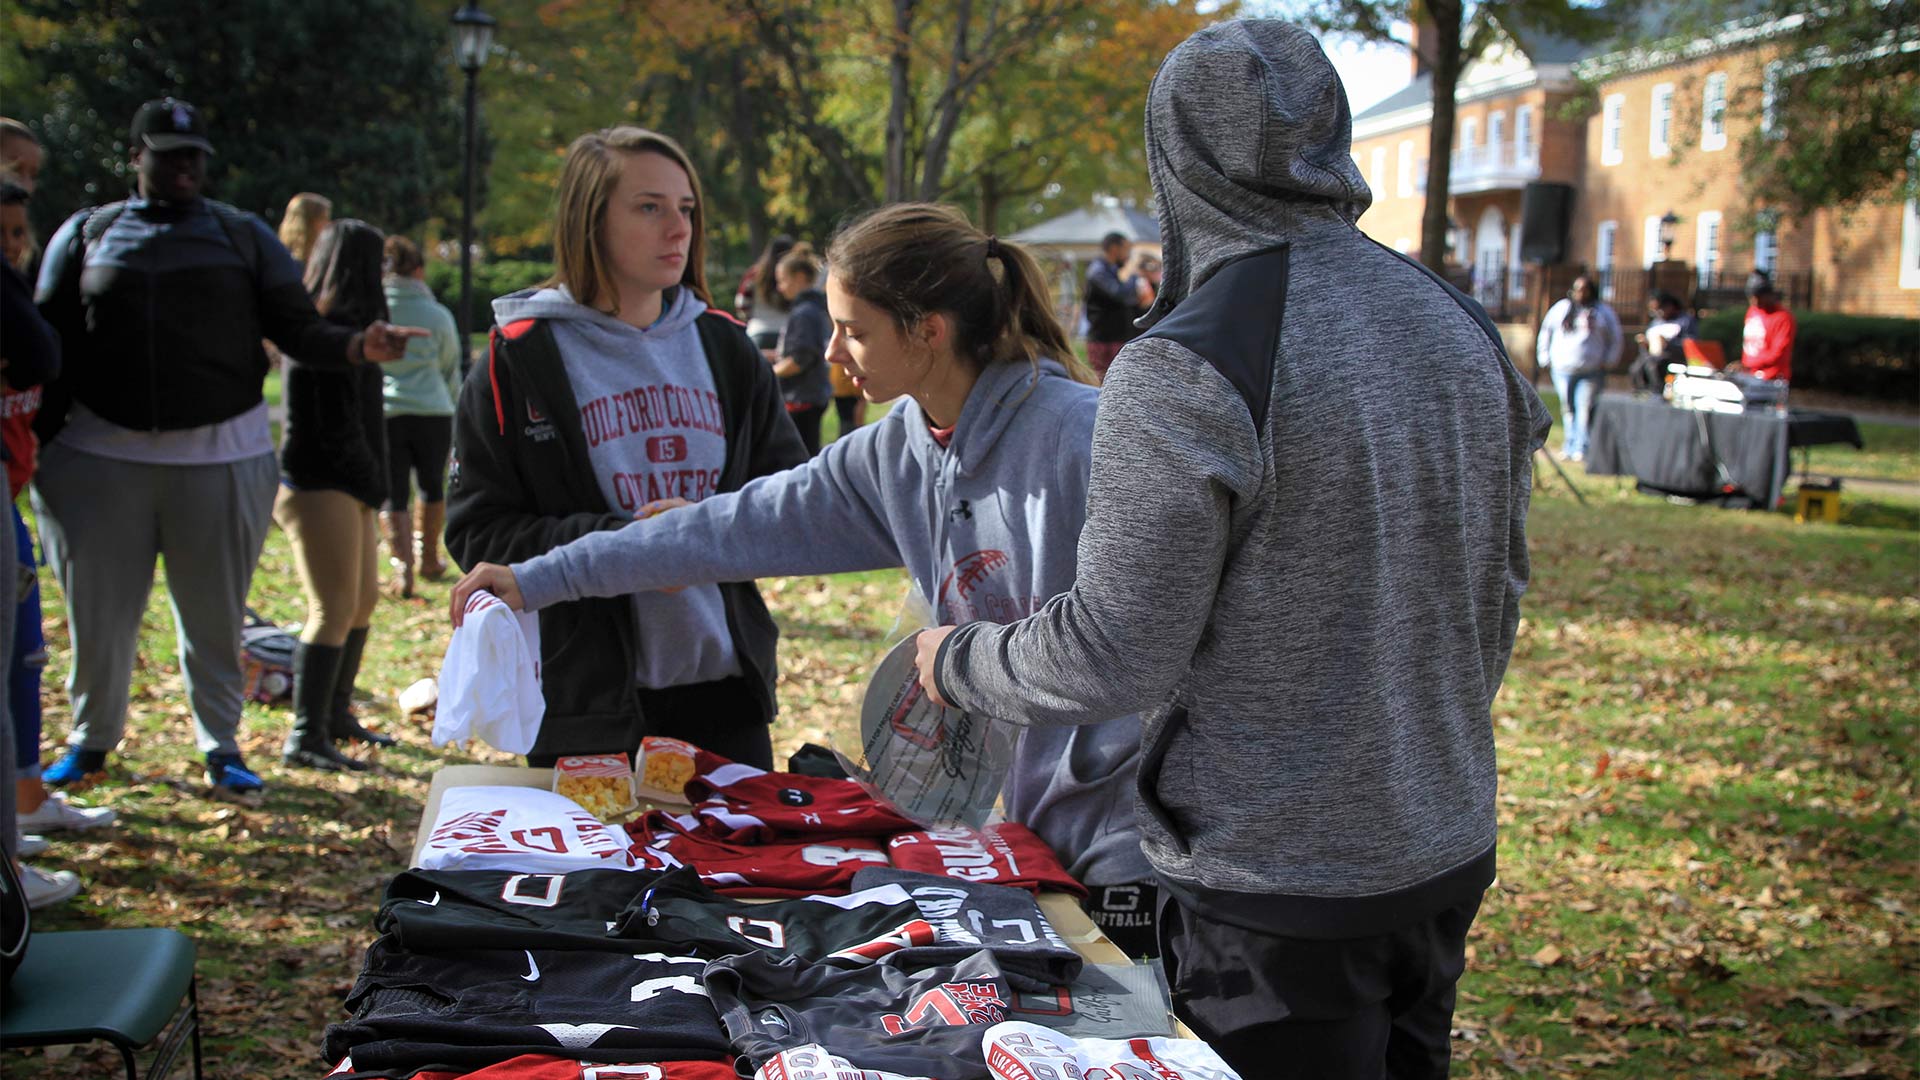 Students grab free t-shirts during the event.